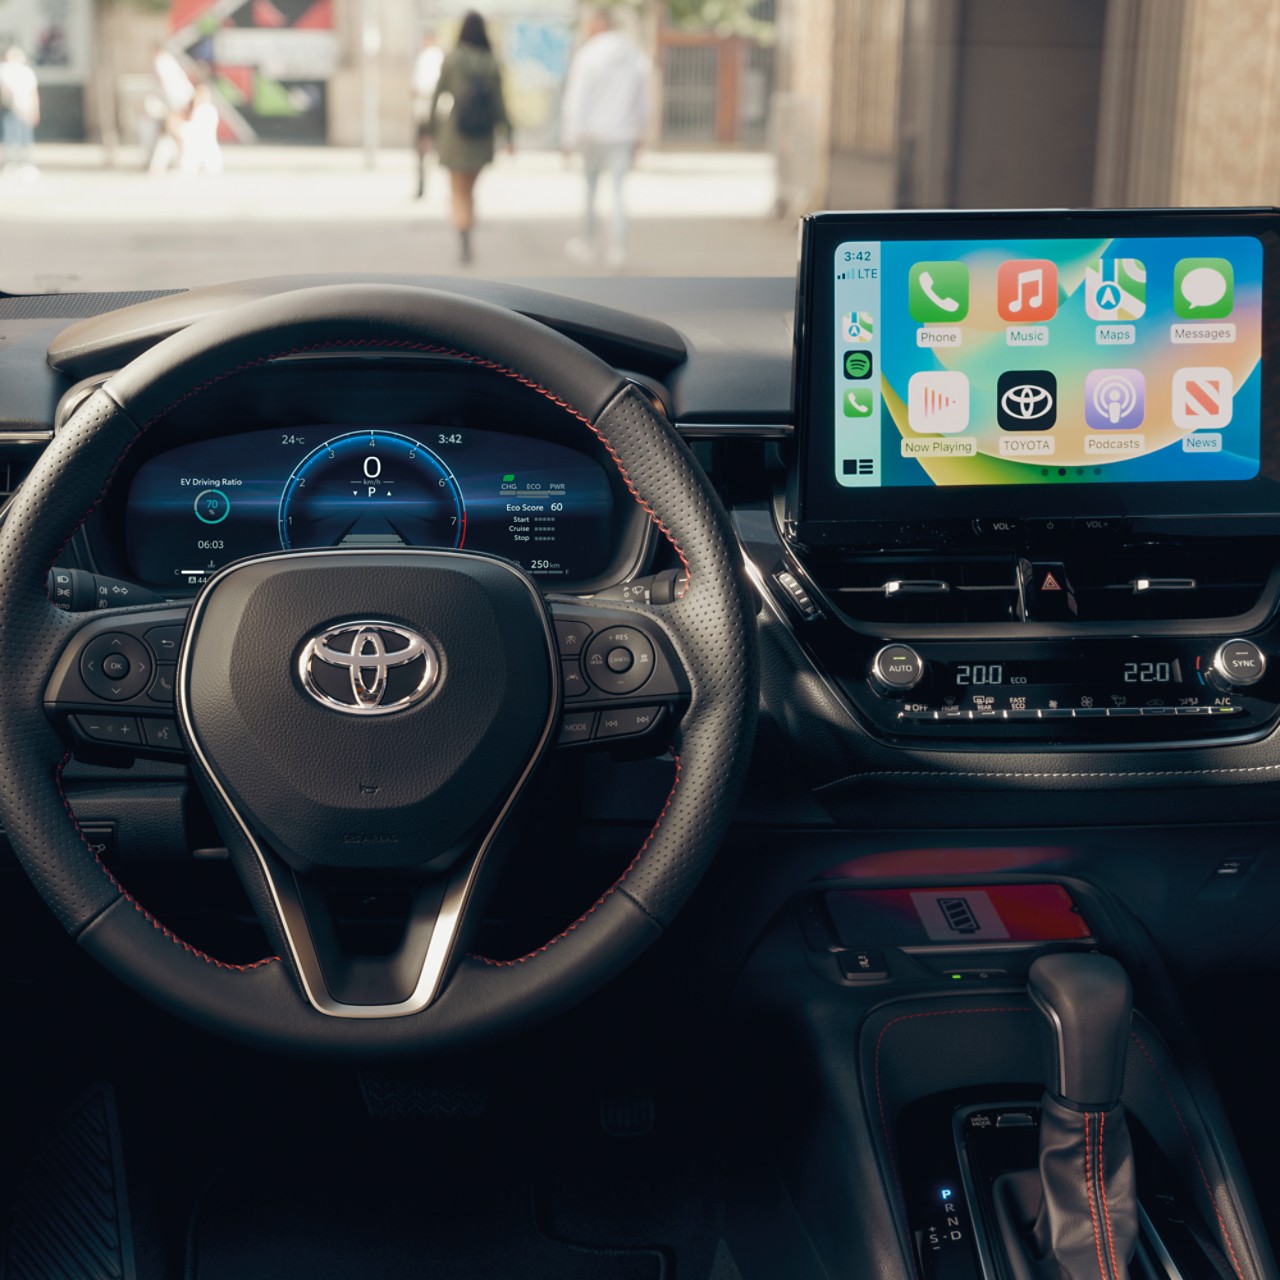 A multimedia touchscreen displays the Apple CarPlay home screen inside a Toyota car with a black dashboard.